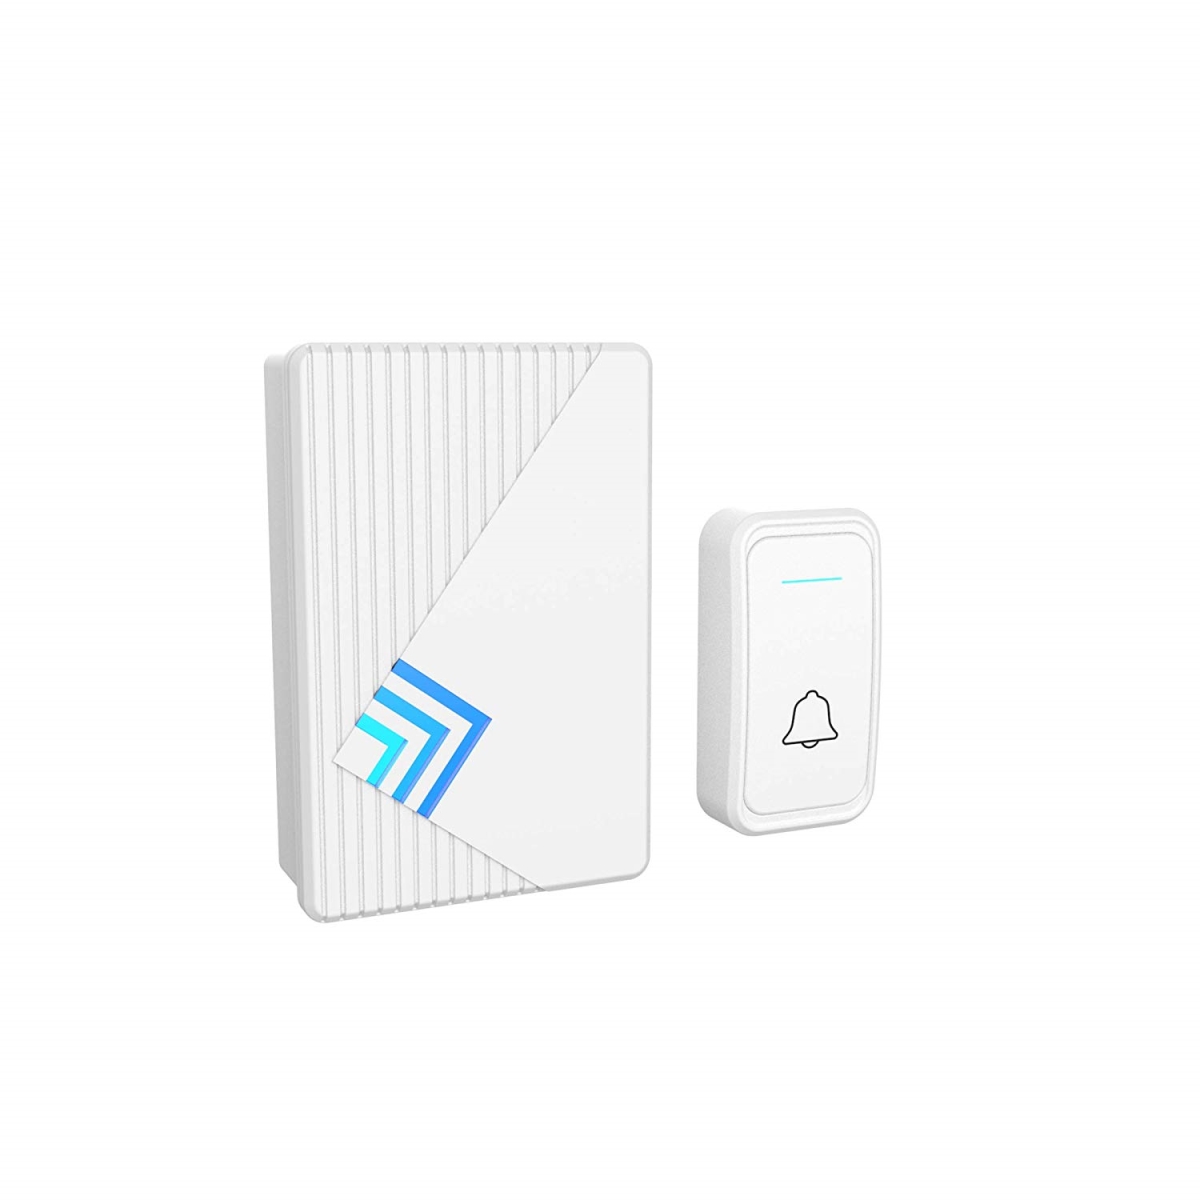 A200031 Doorbell Wireless Electronic Battery Operated Alert System With Led Indicator